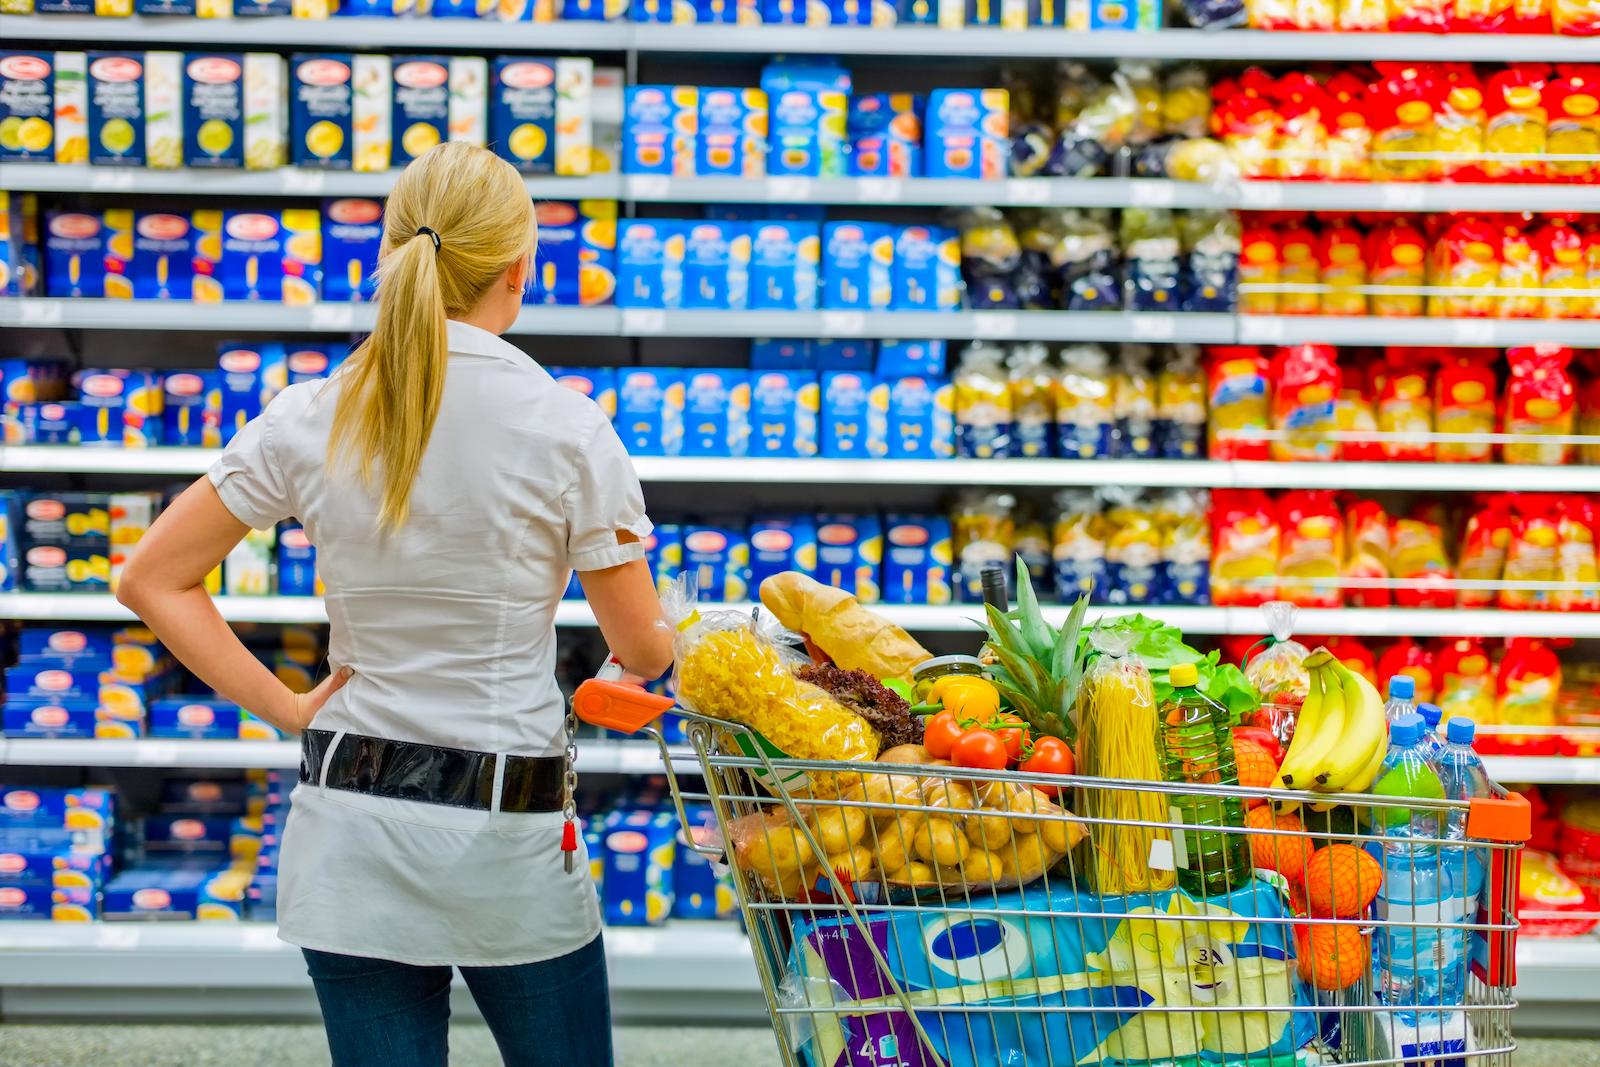 Woman next to a full shopping cart looking at grocery store shelves